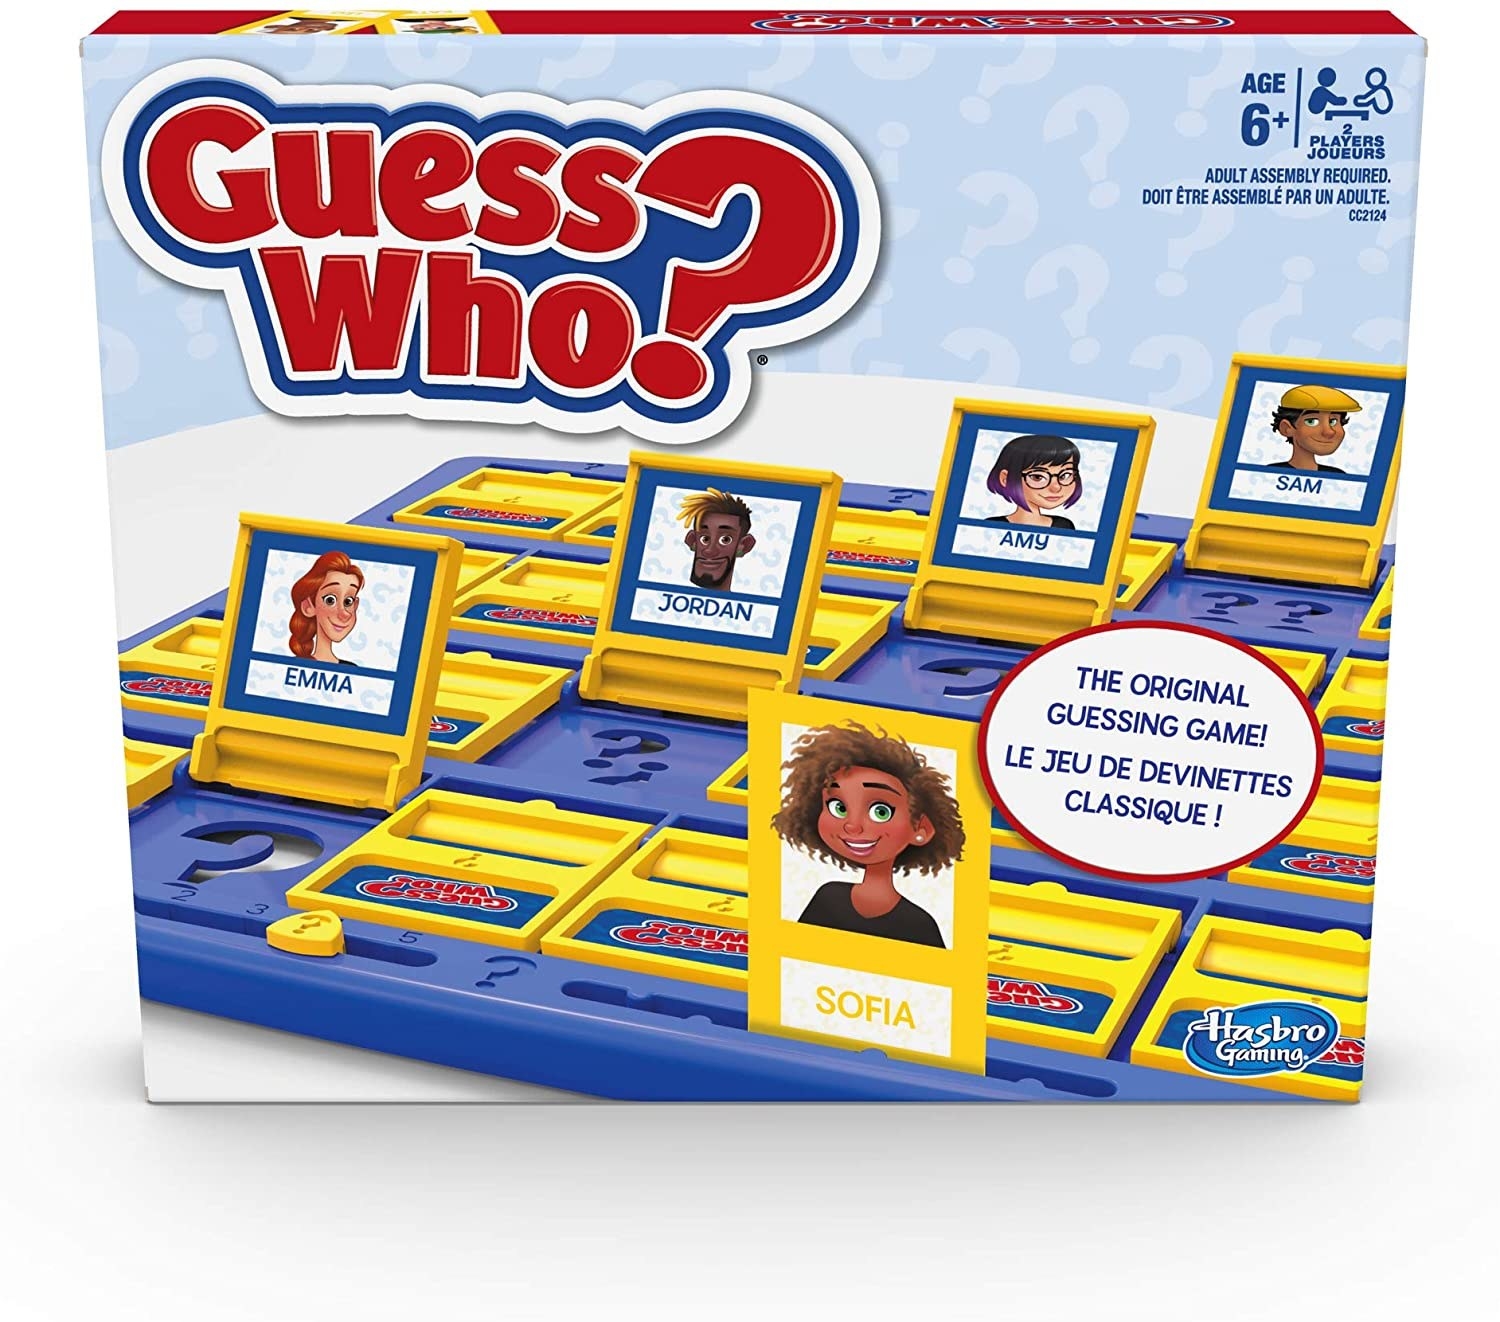 The box with the Guess Who? board on its cover